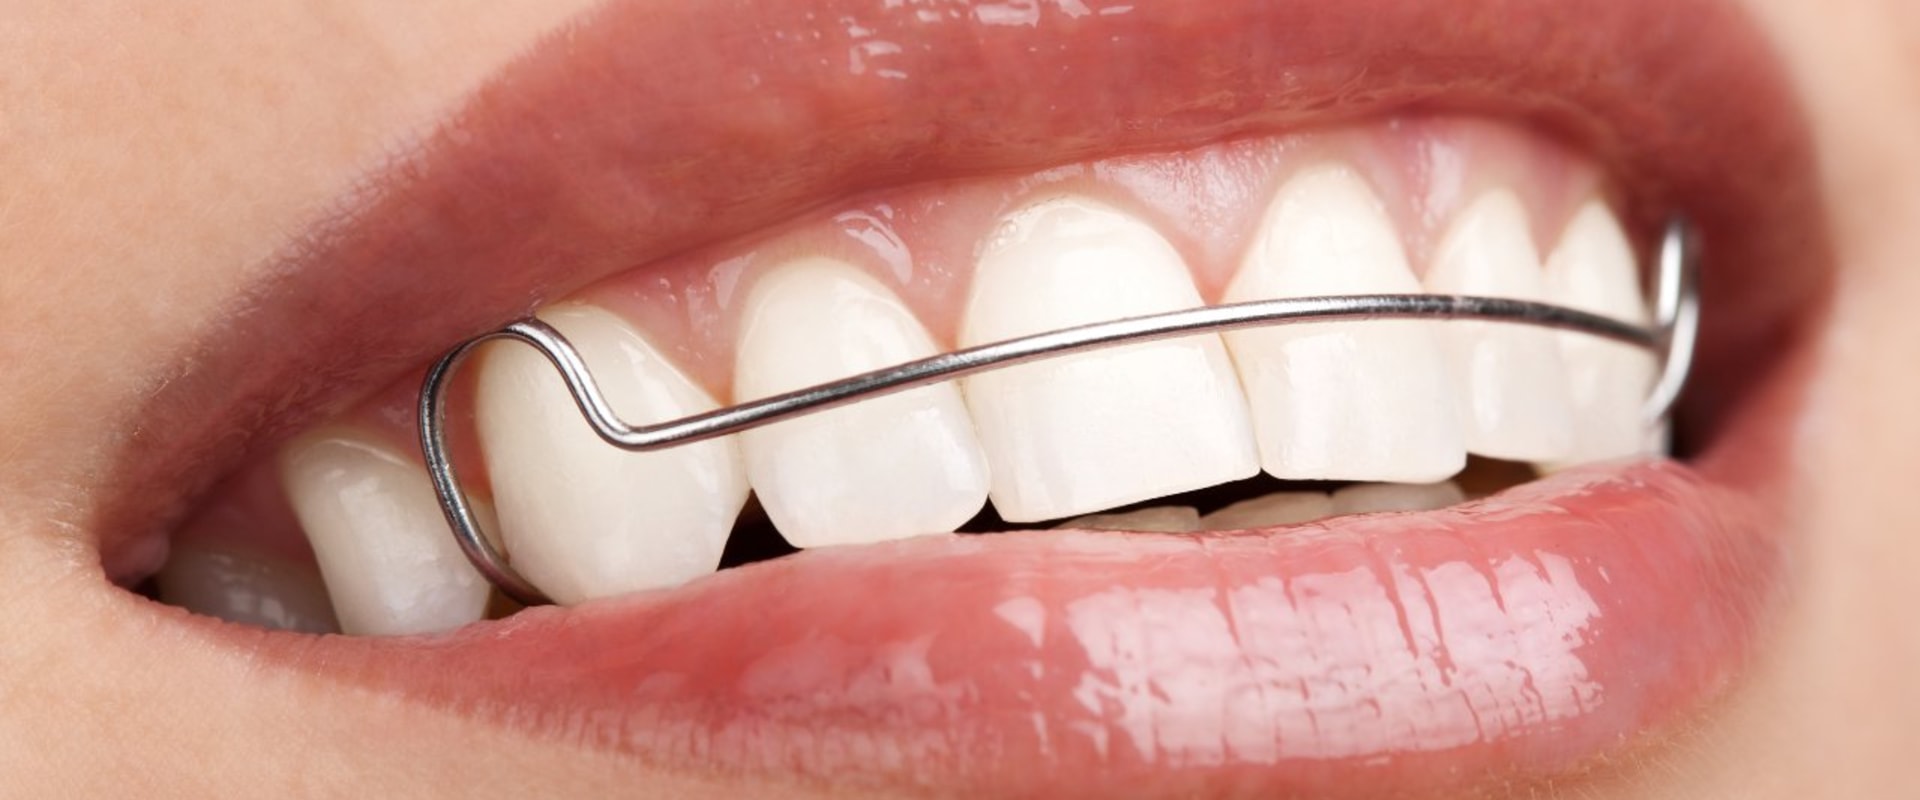 Do You Need a Retainer After Orthodontic Treatment is Complete? - An Expert's Guide